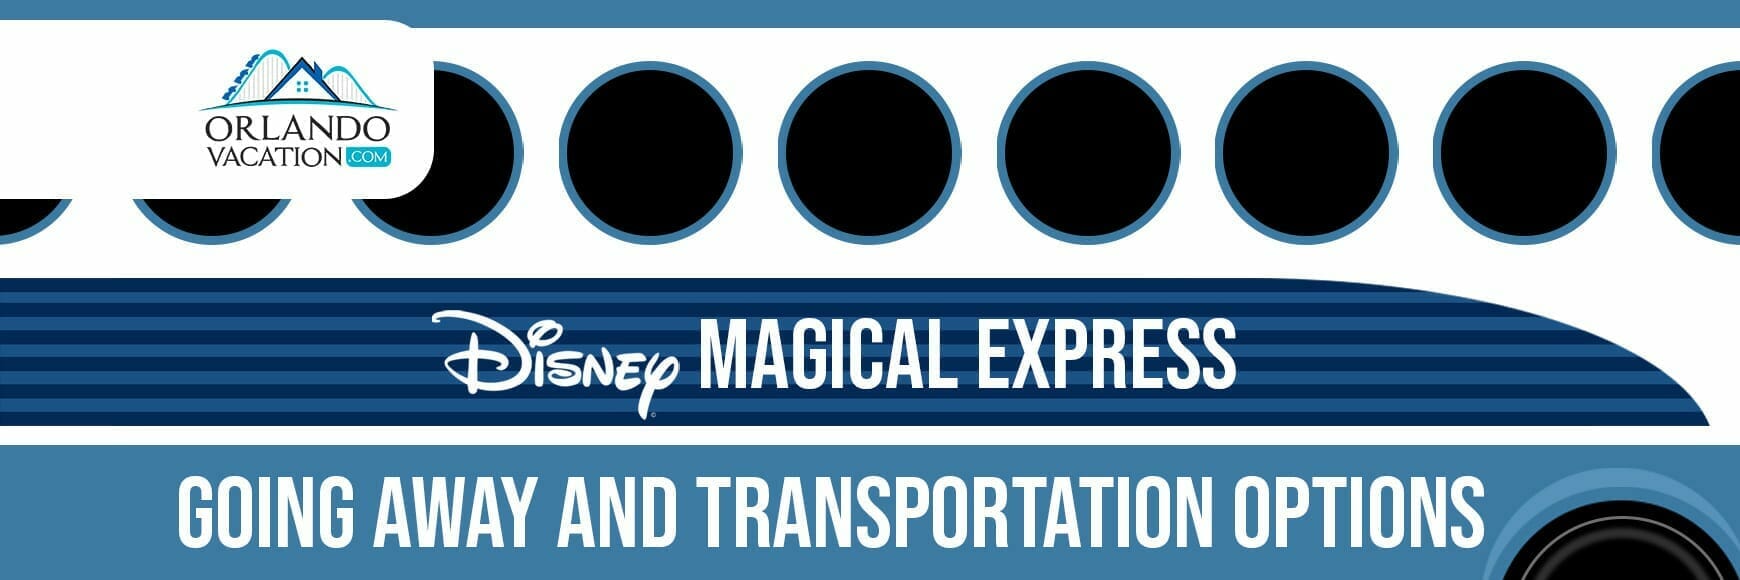 Magical Express Going Away and Transportation Options